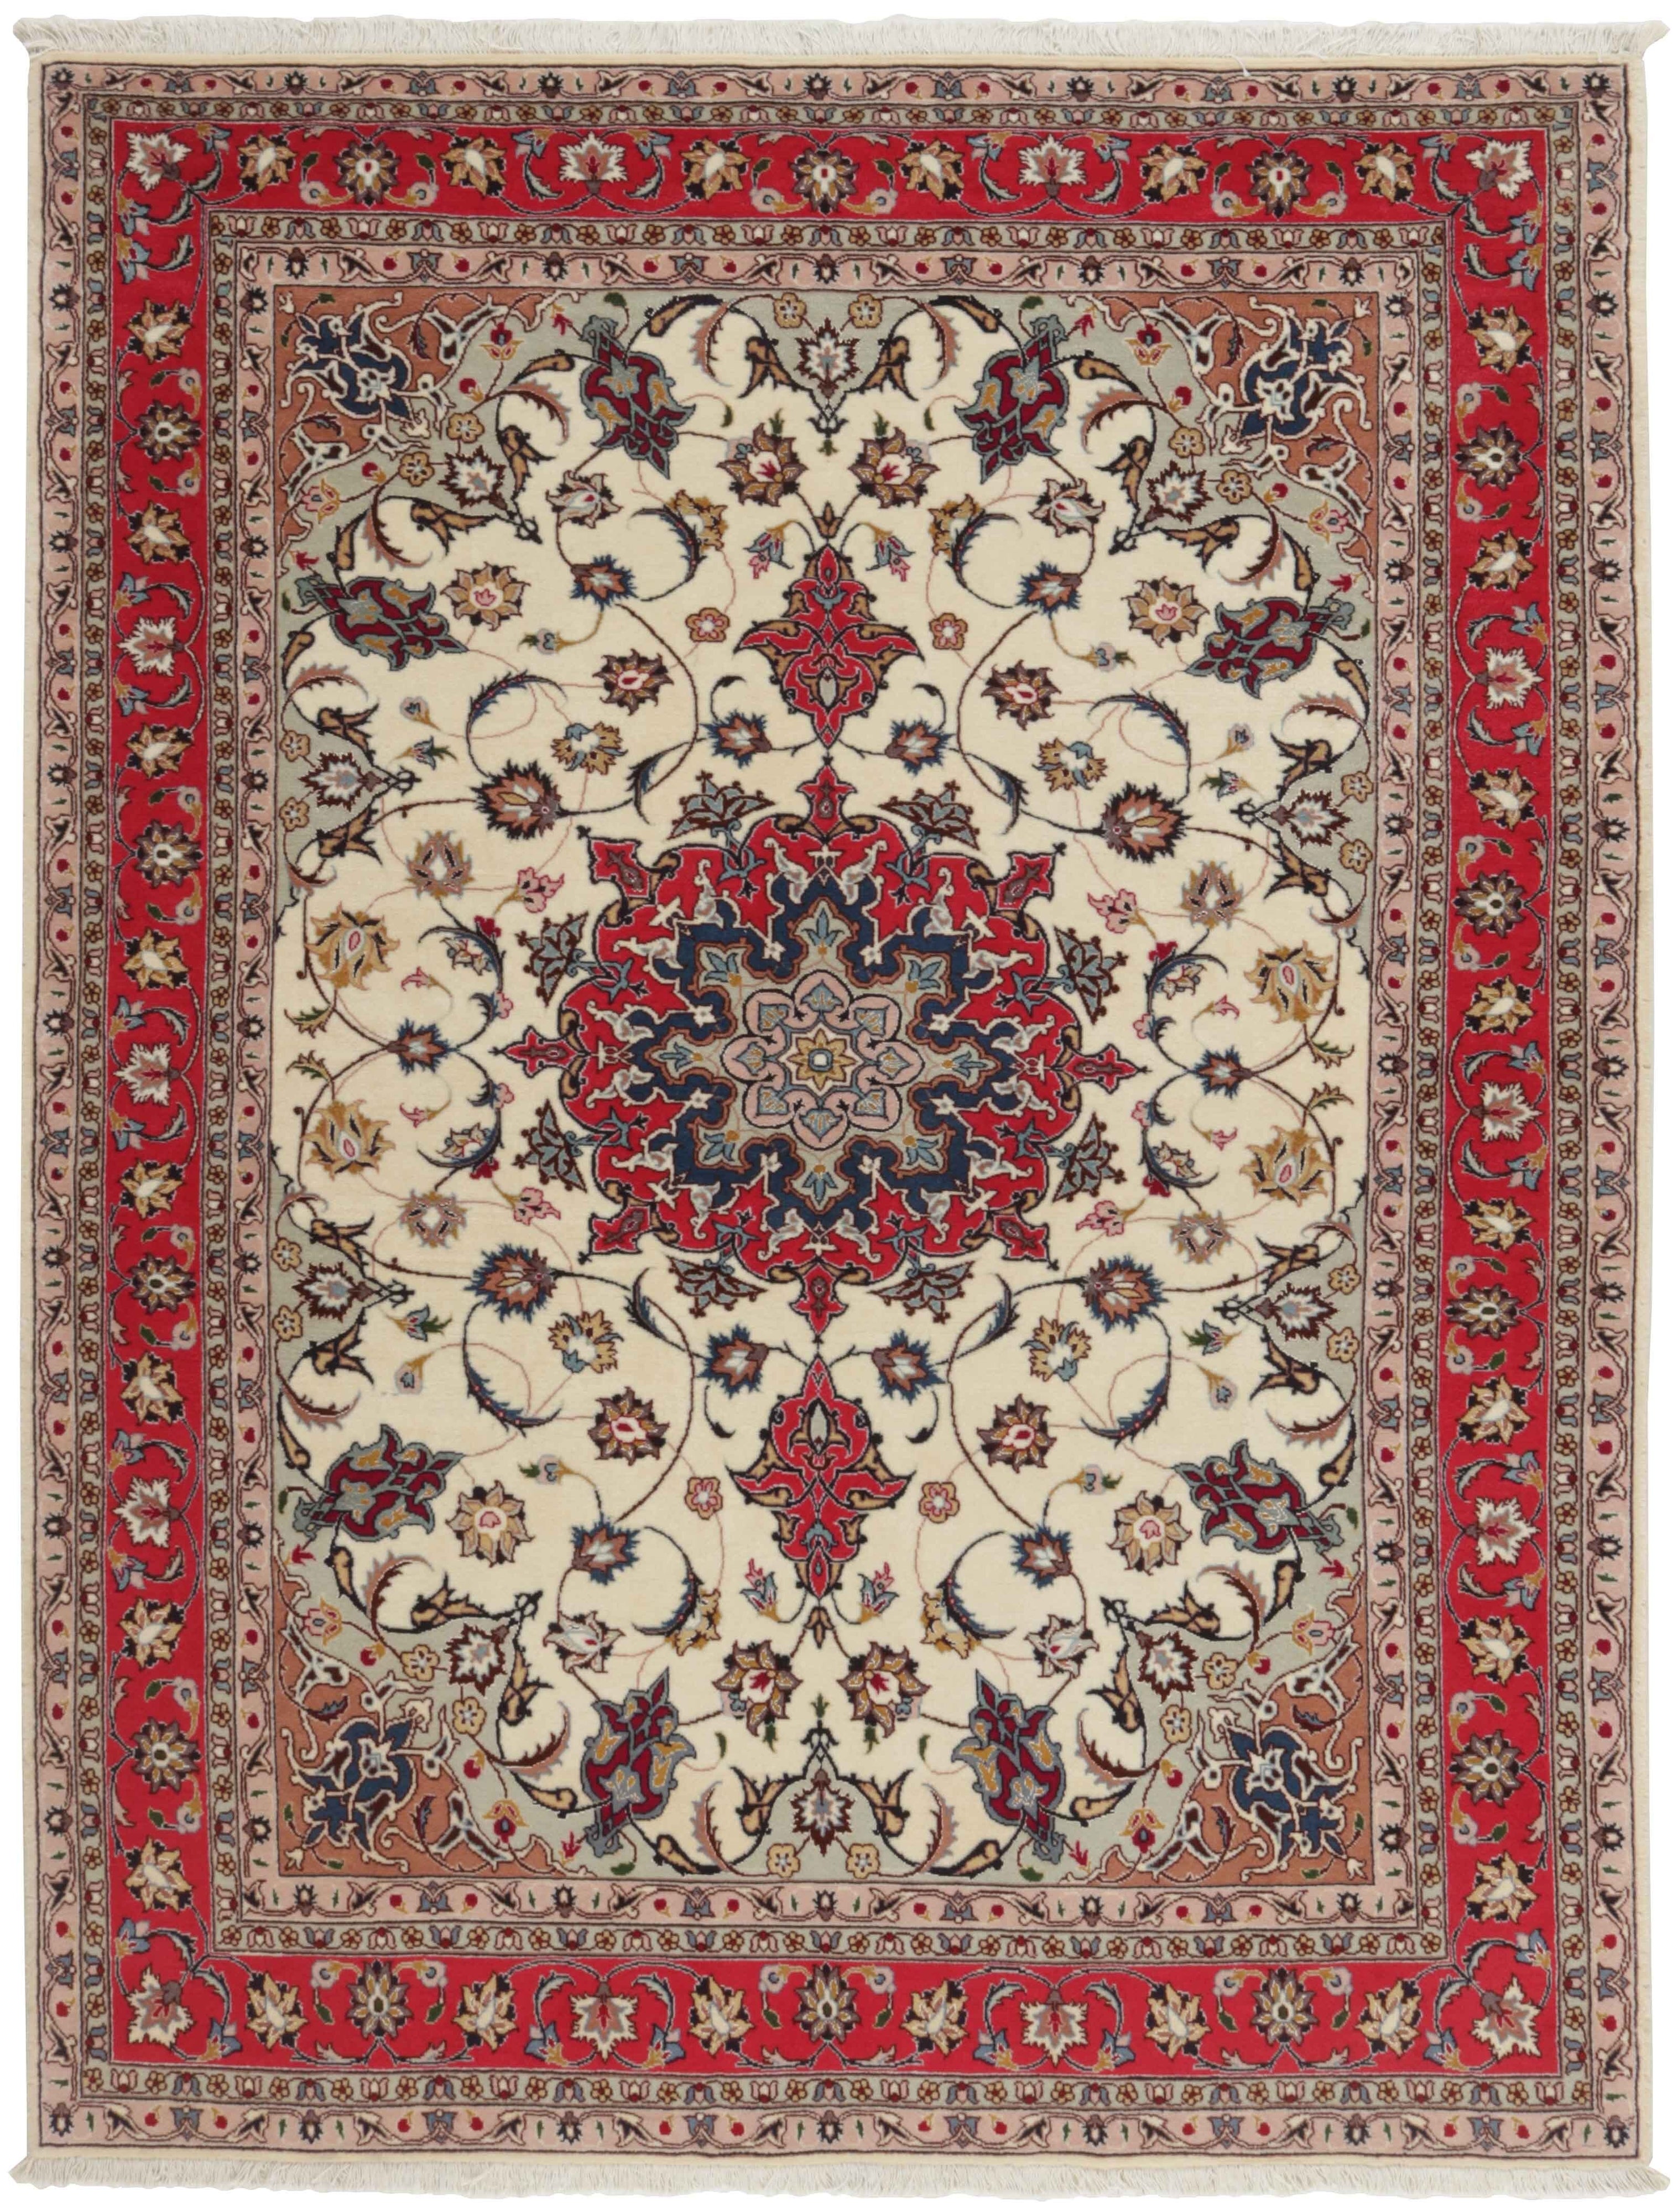 Authentic persian rug with traditional floral design in red, blue and beige